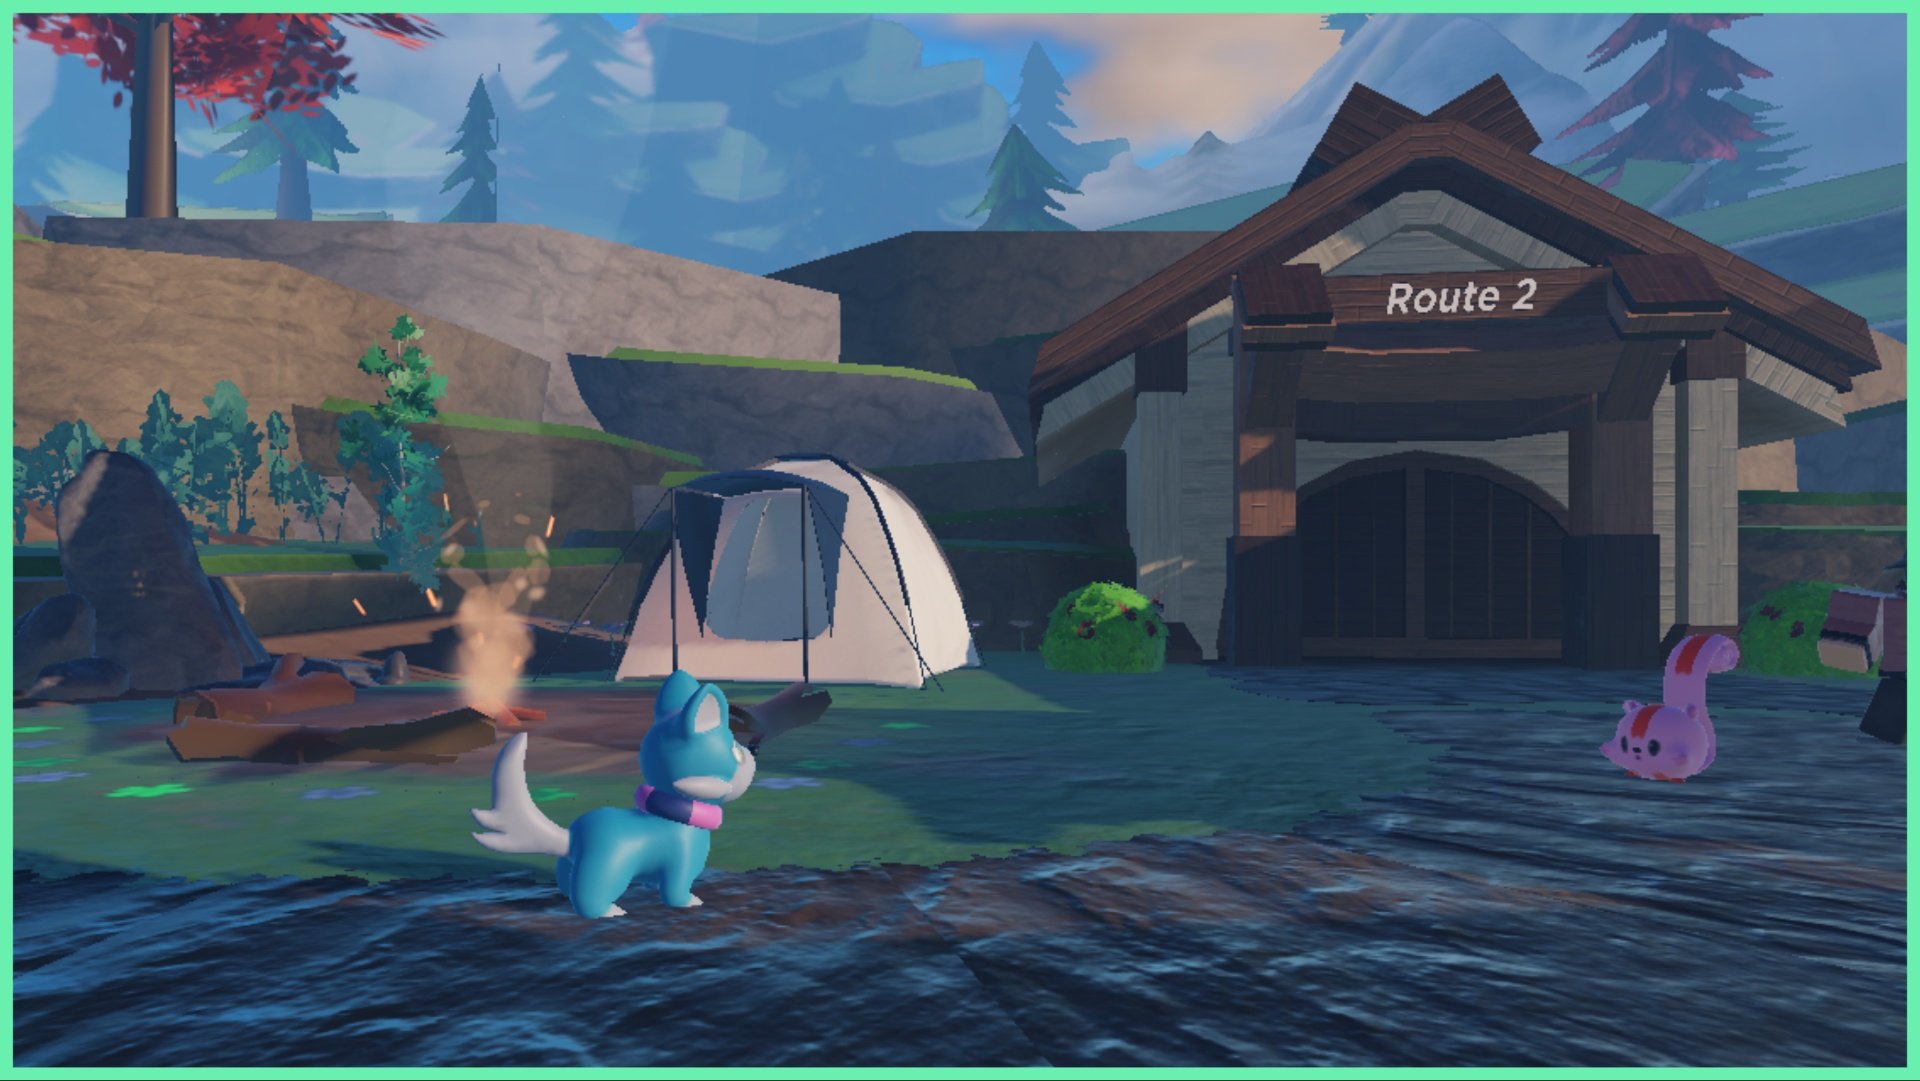 The image shows a cut scene battle between my tanoiran and a fellow trainer npcs tanorian with the route 2 shack in the background as well as a tent. The surrounding scenery is sunny with nice shrubs and greenery